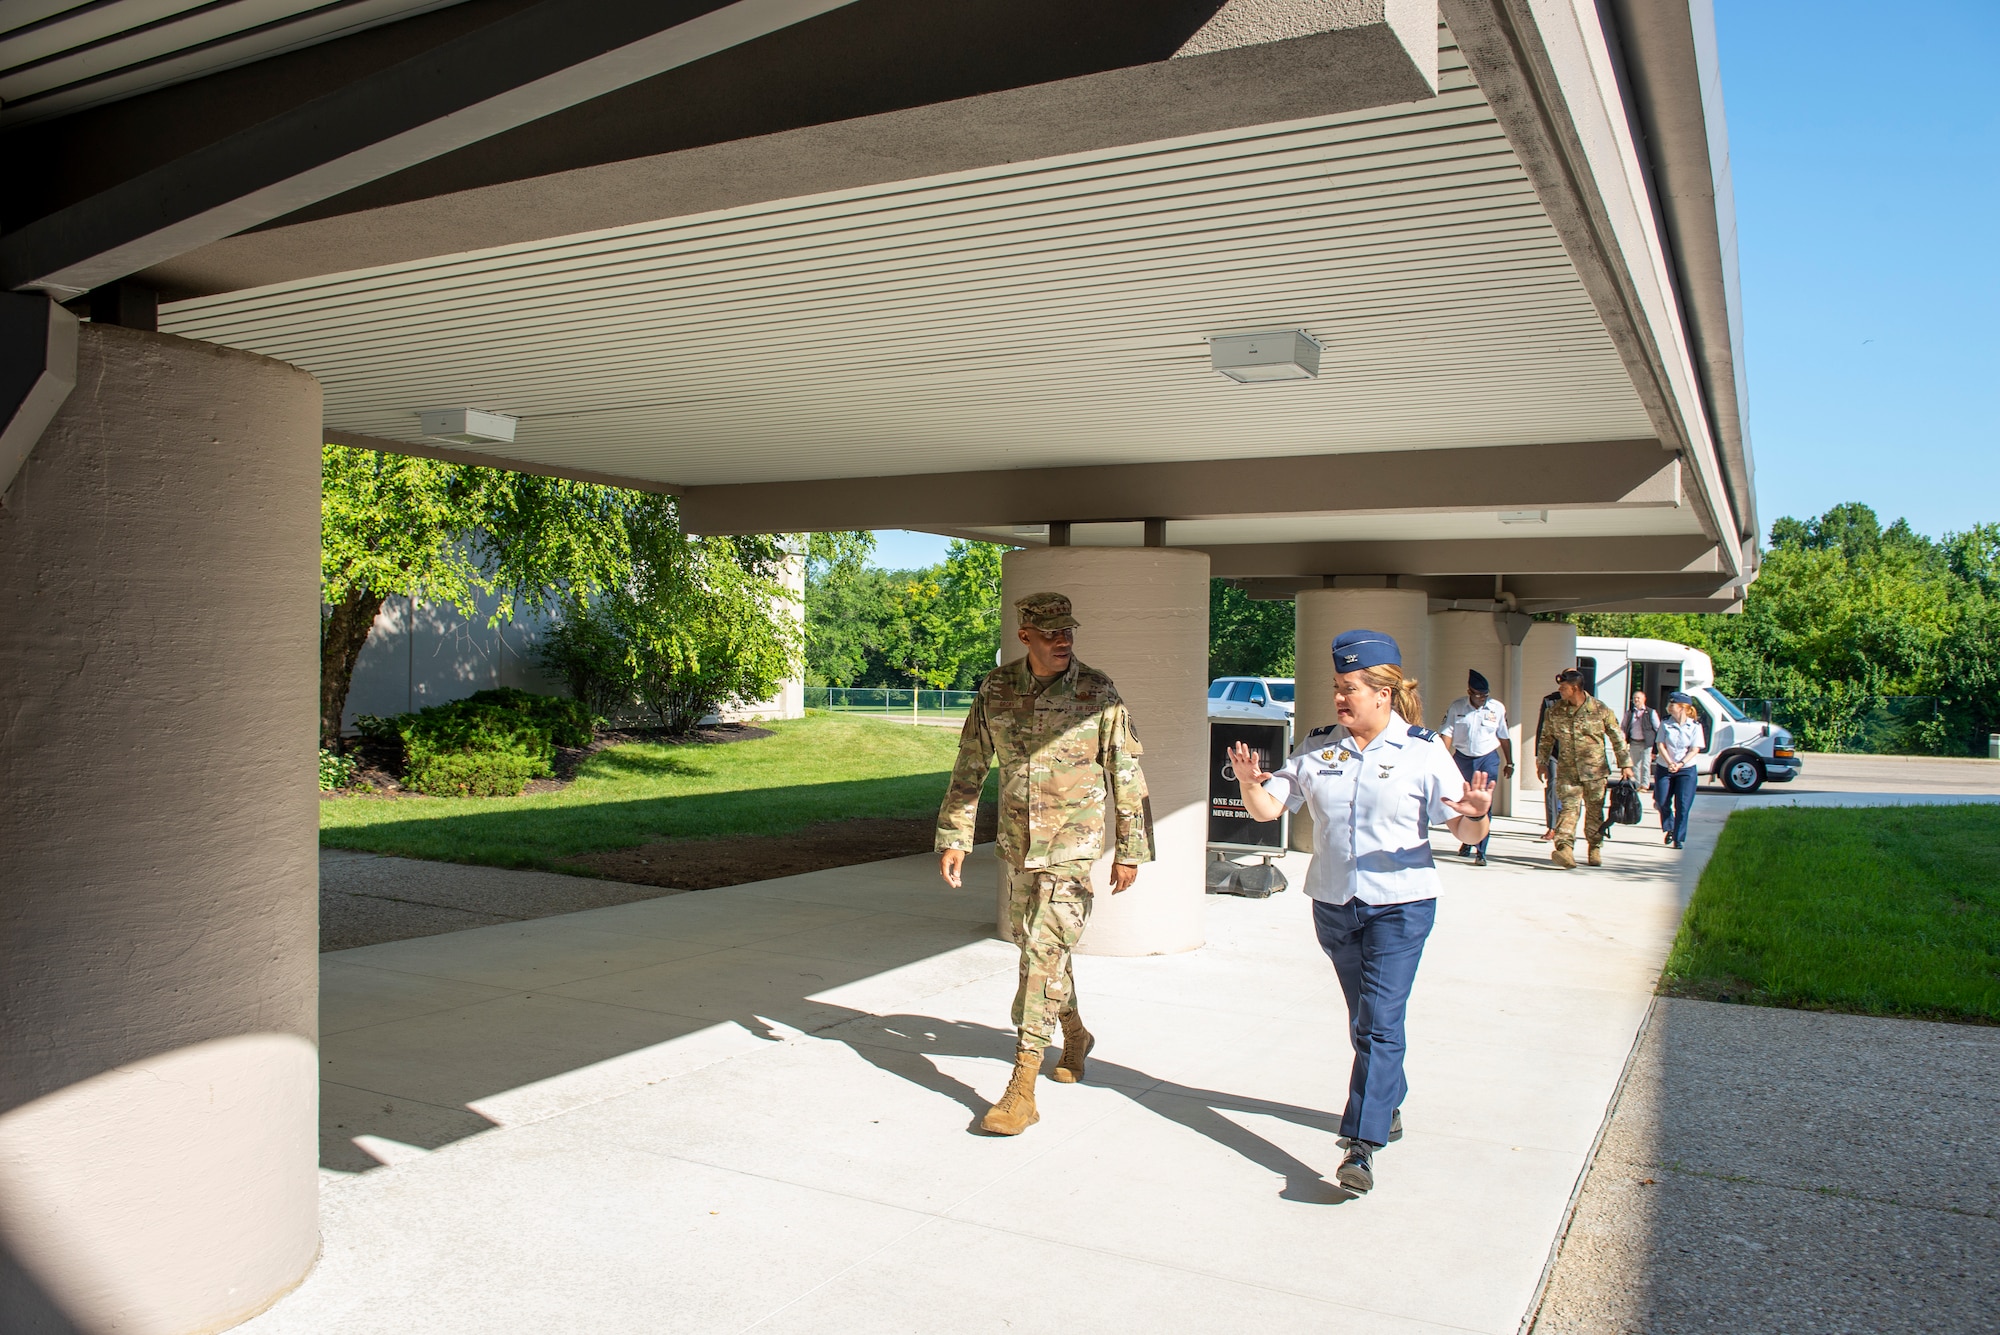 Air Force Chief of Staff Gen. CQ Brown, Jr. walks with Col. Ariel G. Batungbacal, NASIC commander, into NASIC headquarters at Wright-Patterson Air Force Base, Ohio, July 31, 2023. During his visit Brown and Batungbacal, along with other NASIC leadership, attended various air, space, cyber threat and intelligence briefs, concluding with recognizing the contributions of top NASIC employees.